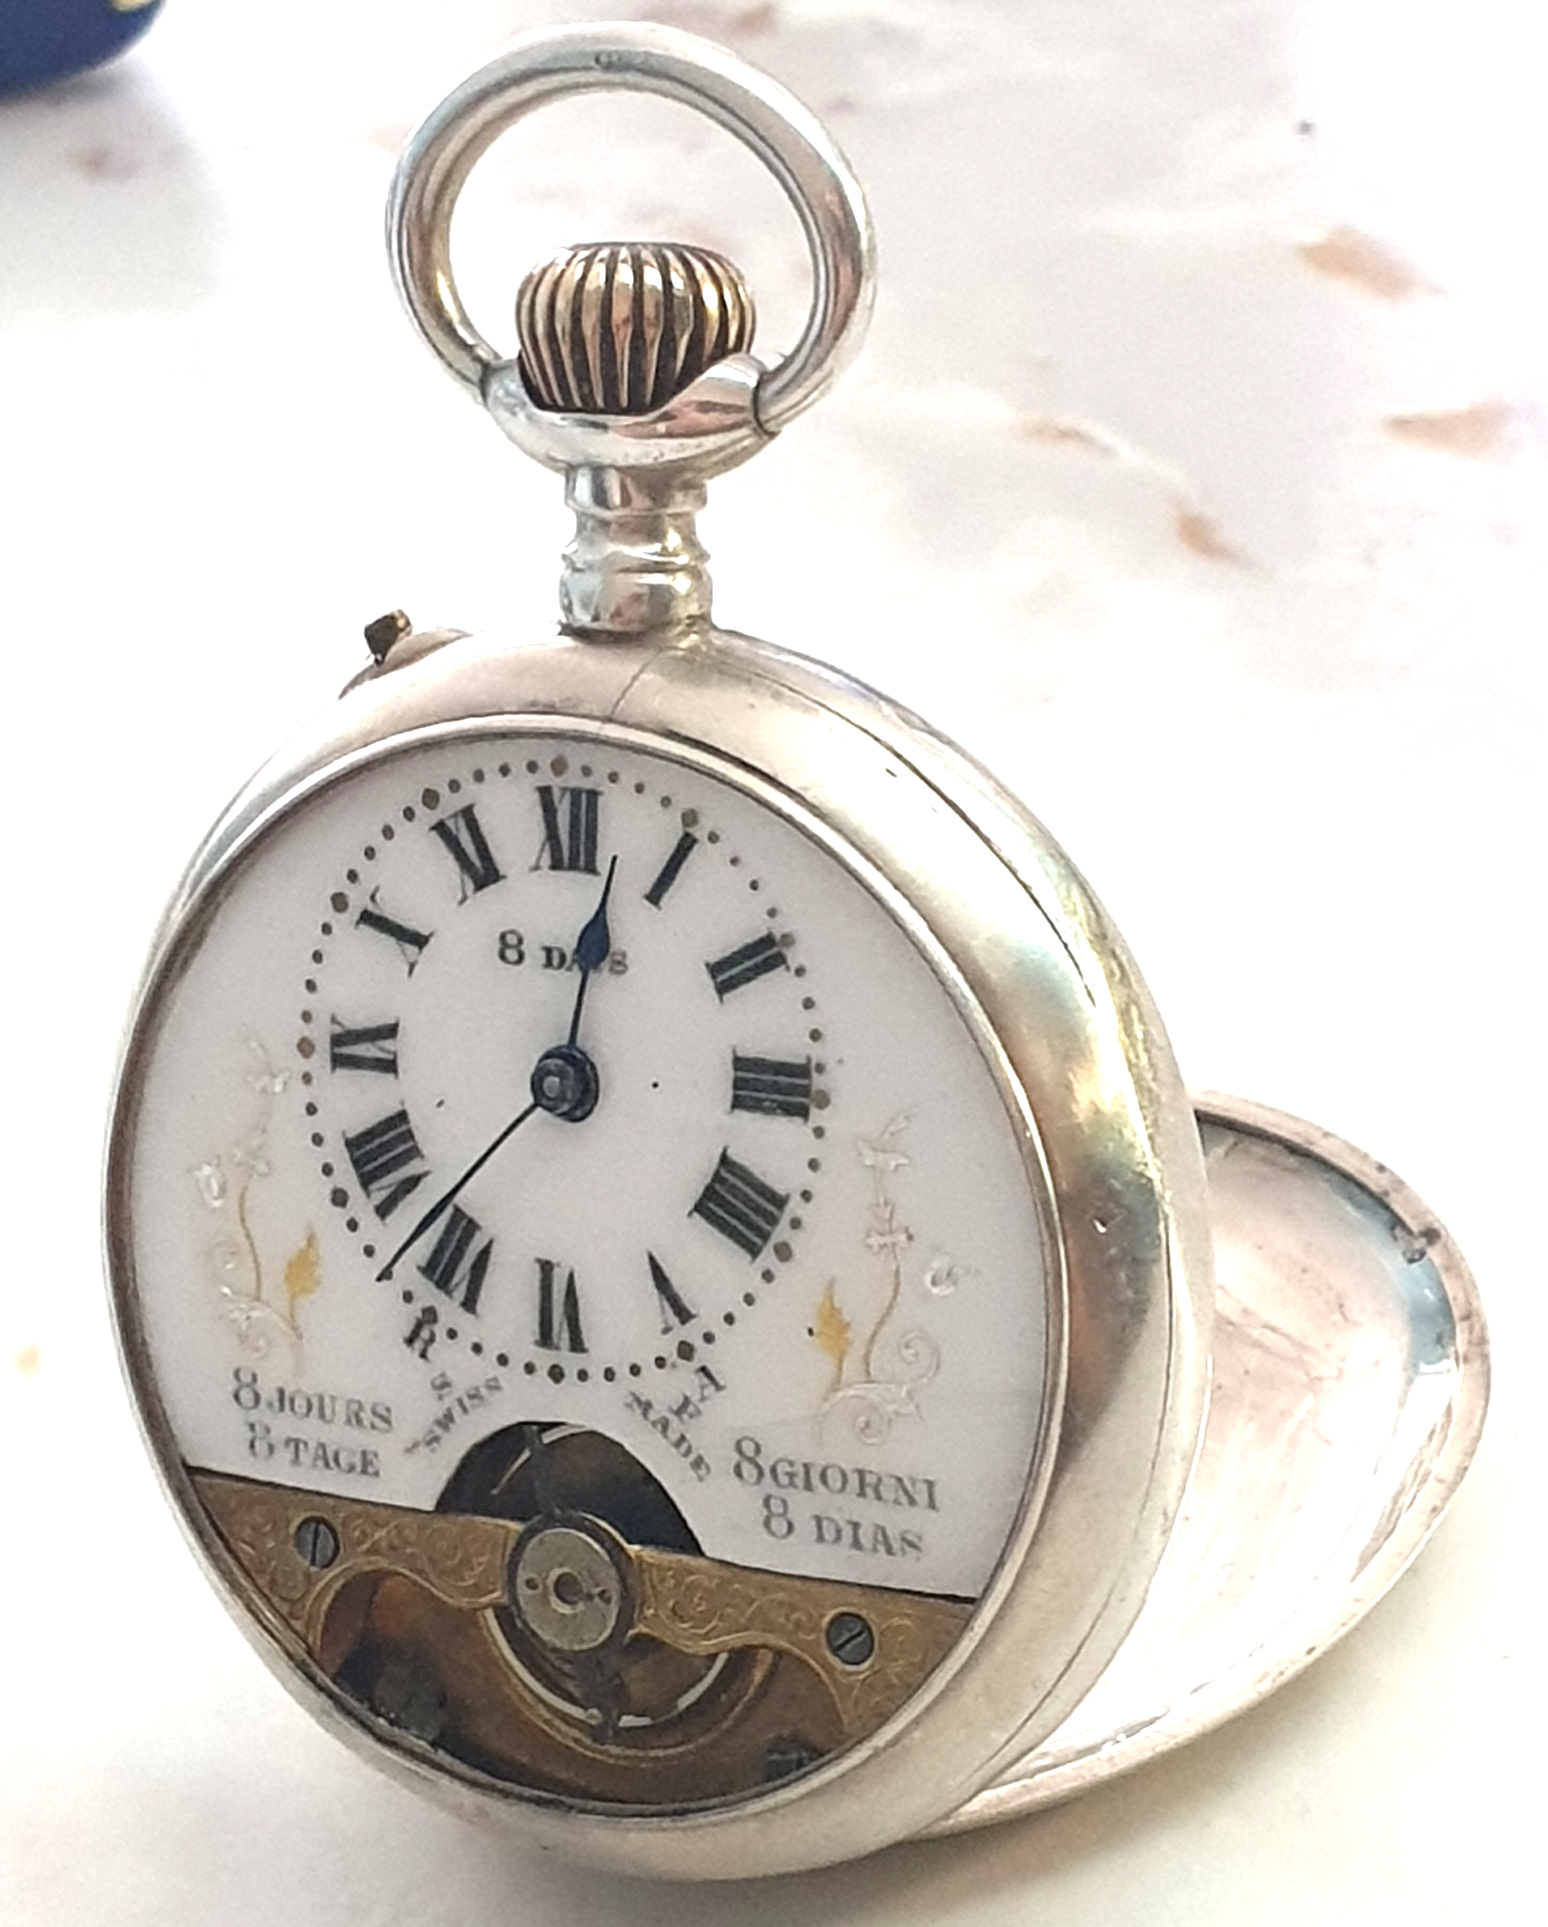 8 DAY HEBDOMAS TOP WIND POCKET WATCH WITH ENAMELLED DIAL AND VISIBLE ESCAPEMENT IN STERLING SILVER - Image 13 of 13